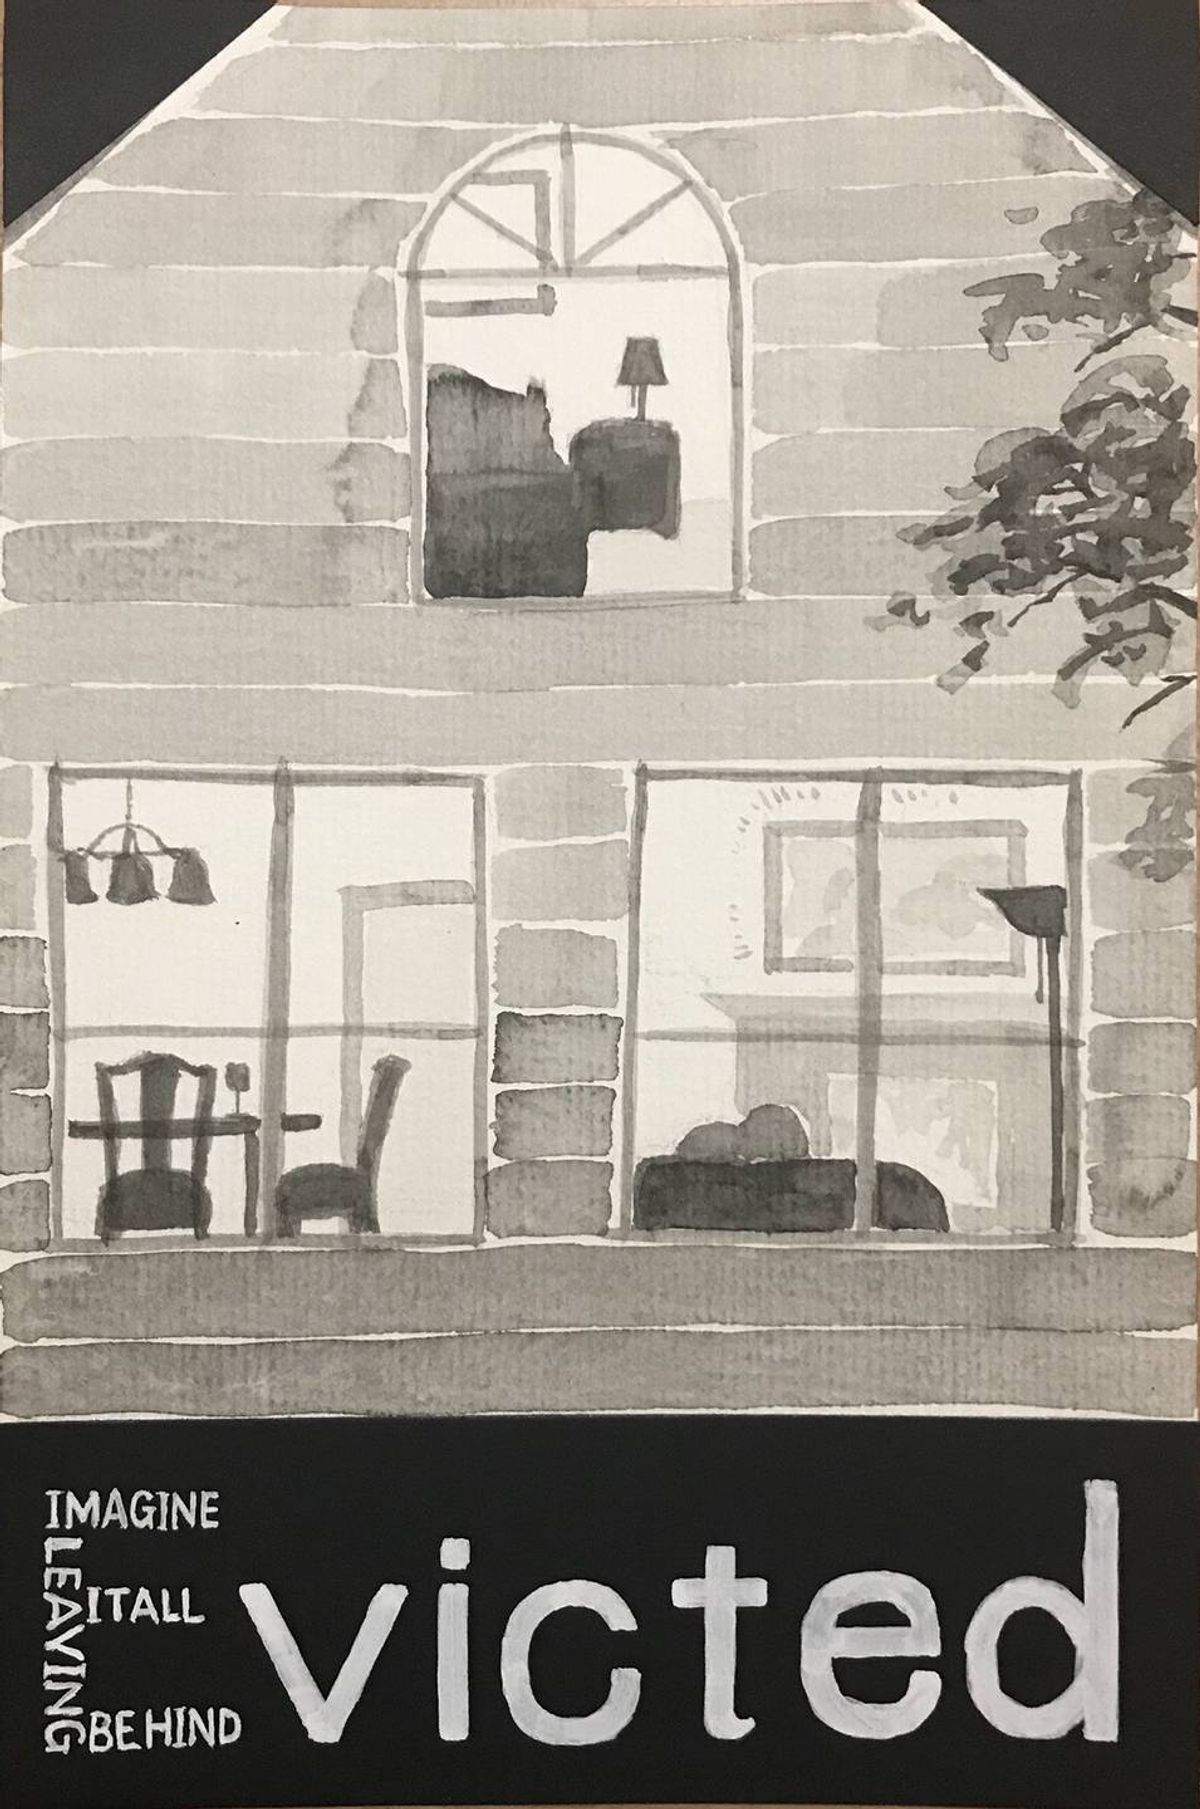 Ink drawing of a home with the word evicted